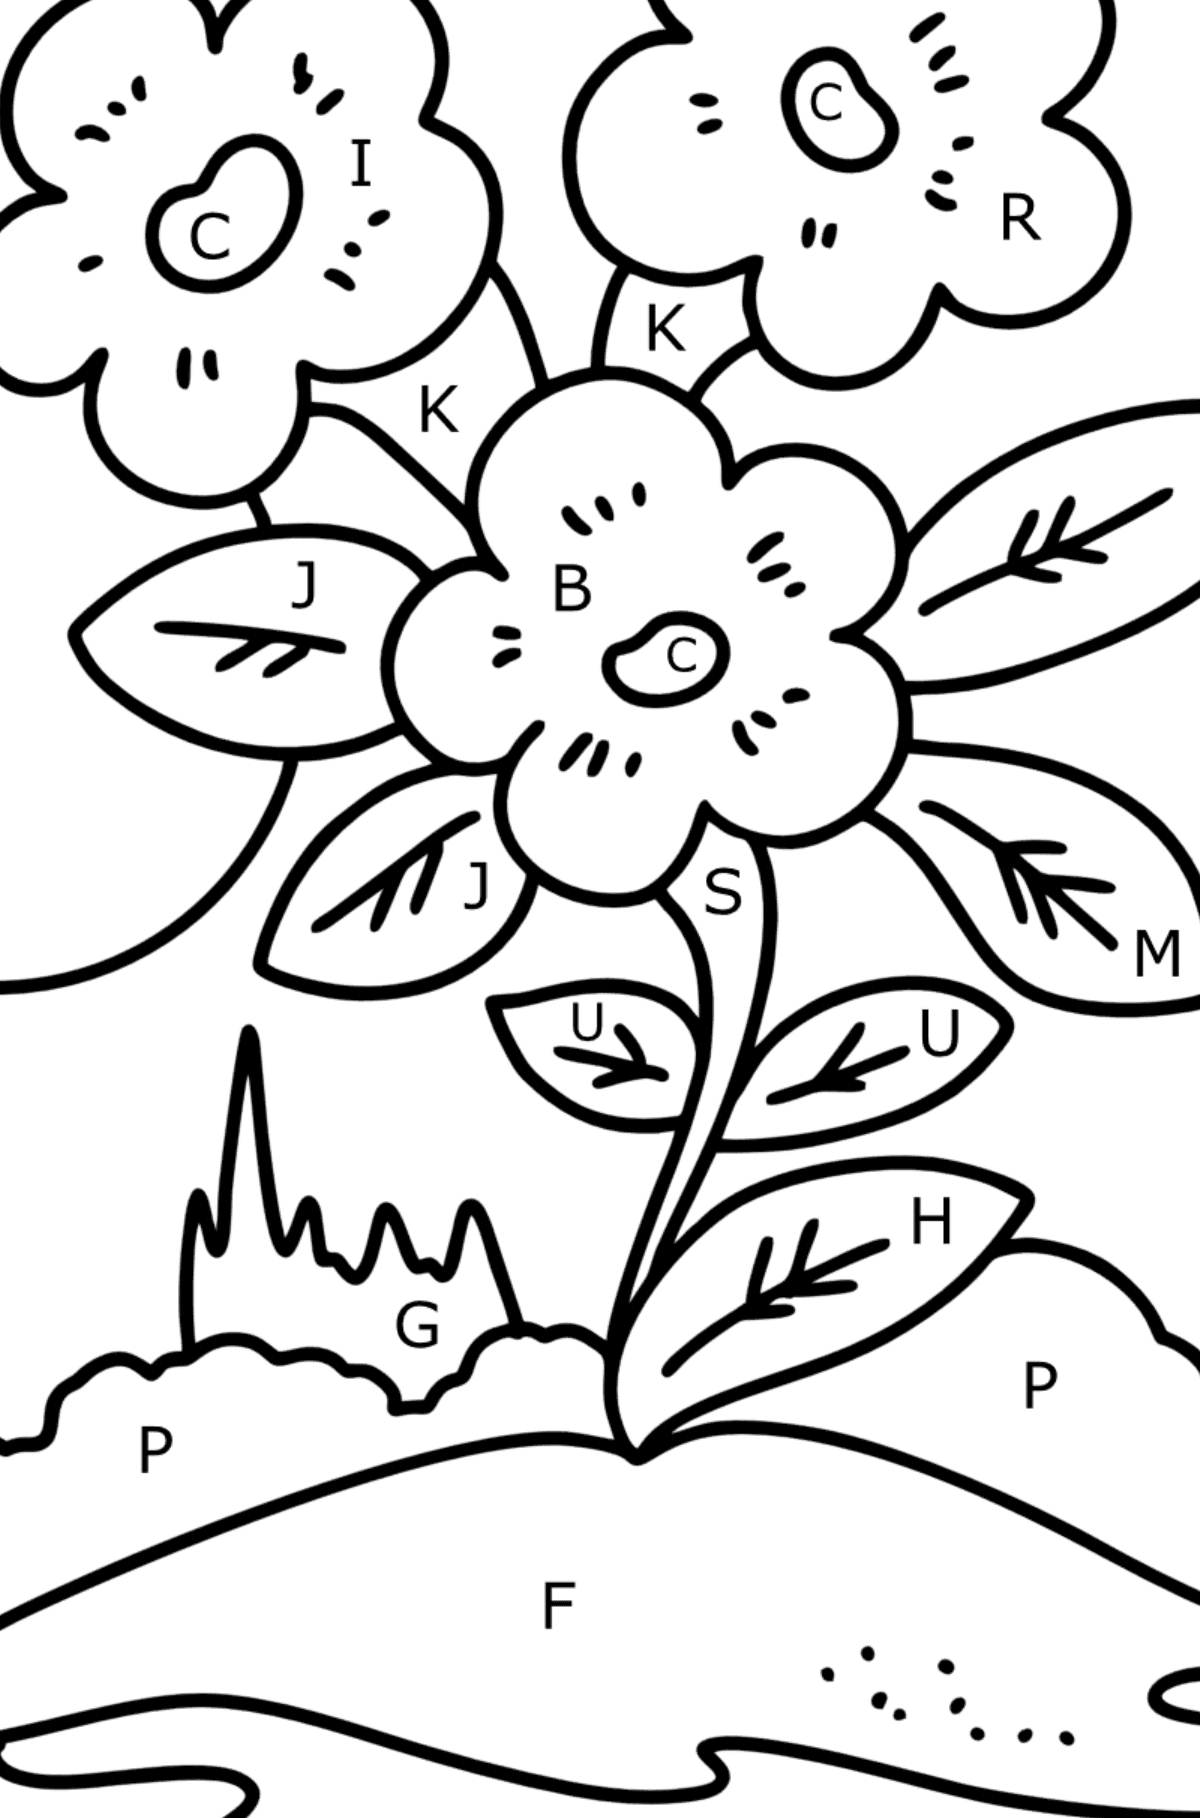 Spring flowers coloring page for Kids - Coloring by Letters for Kids